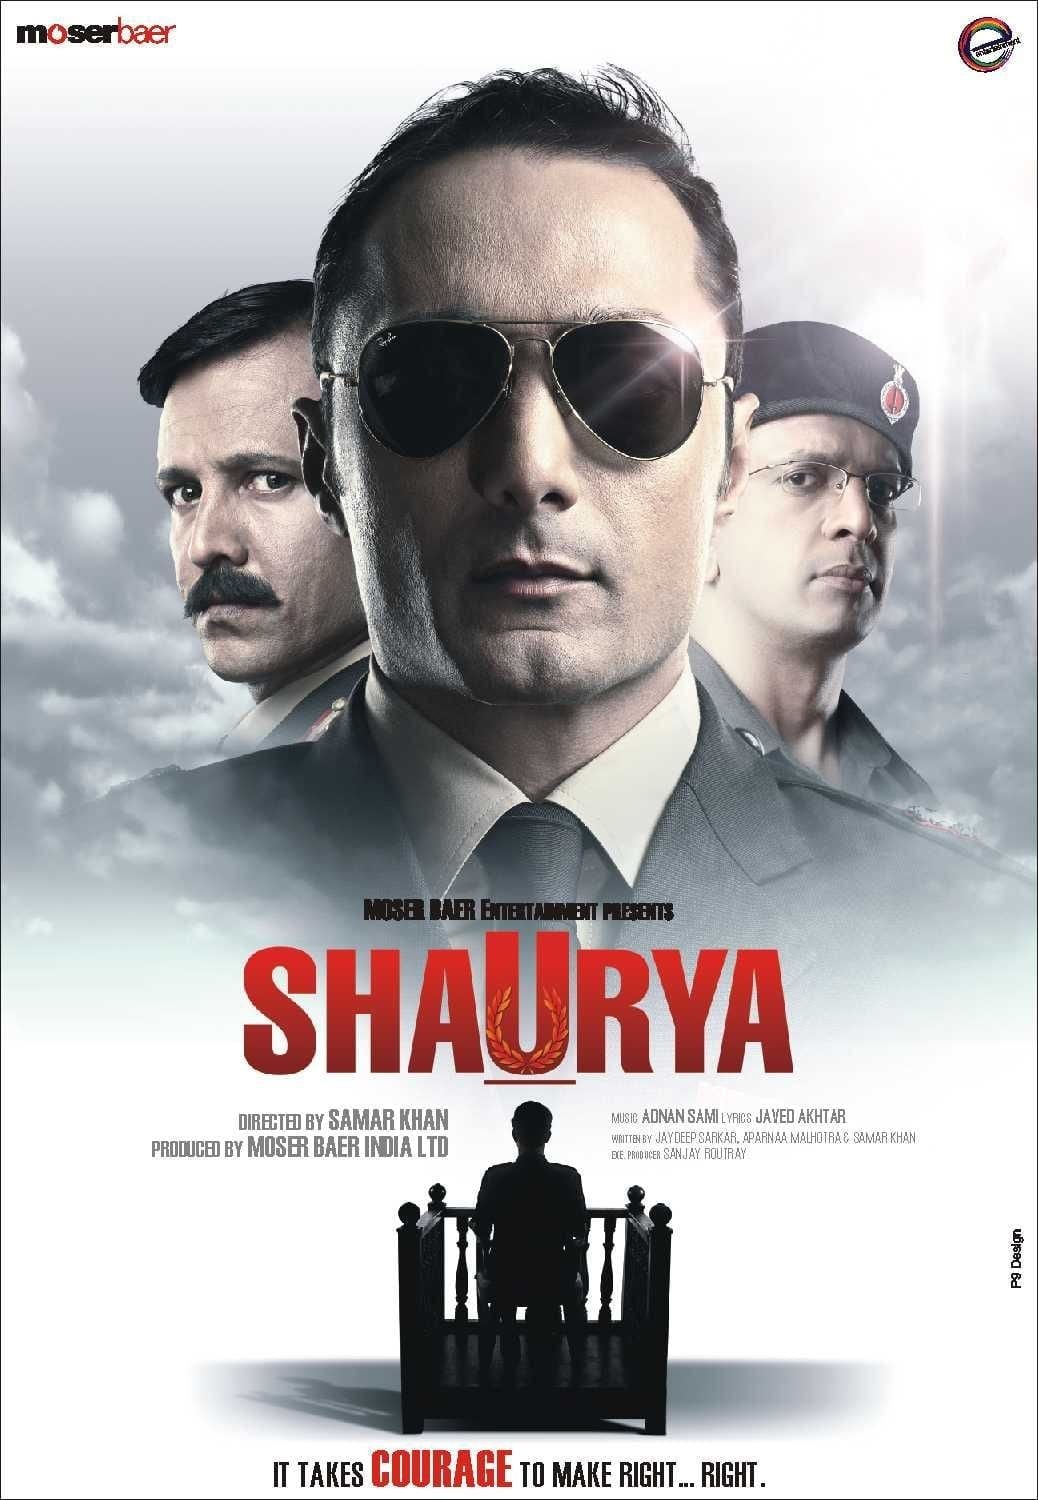 Poster for the movie "Shaurya"